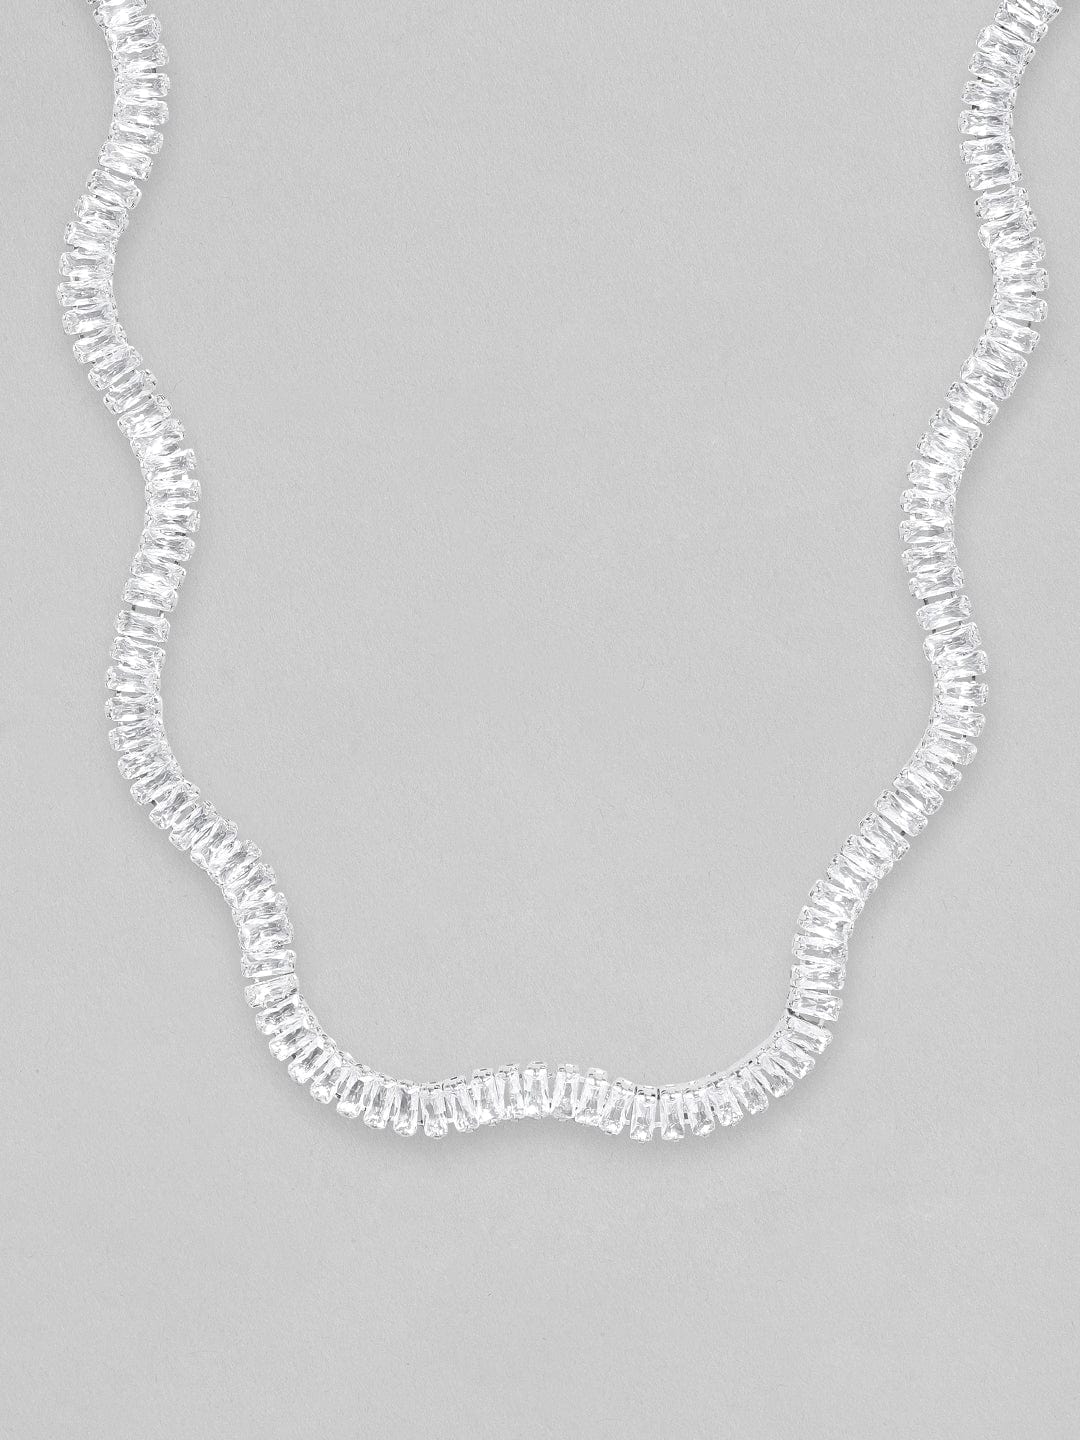 Rubans Voguish Silver Toned With Baguette Stones Studded Choker Necklace. Chain &amp; Necklaces